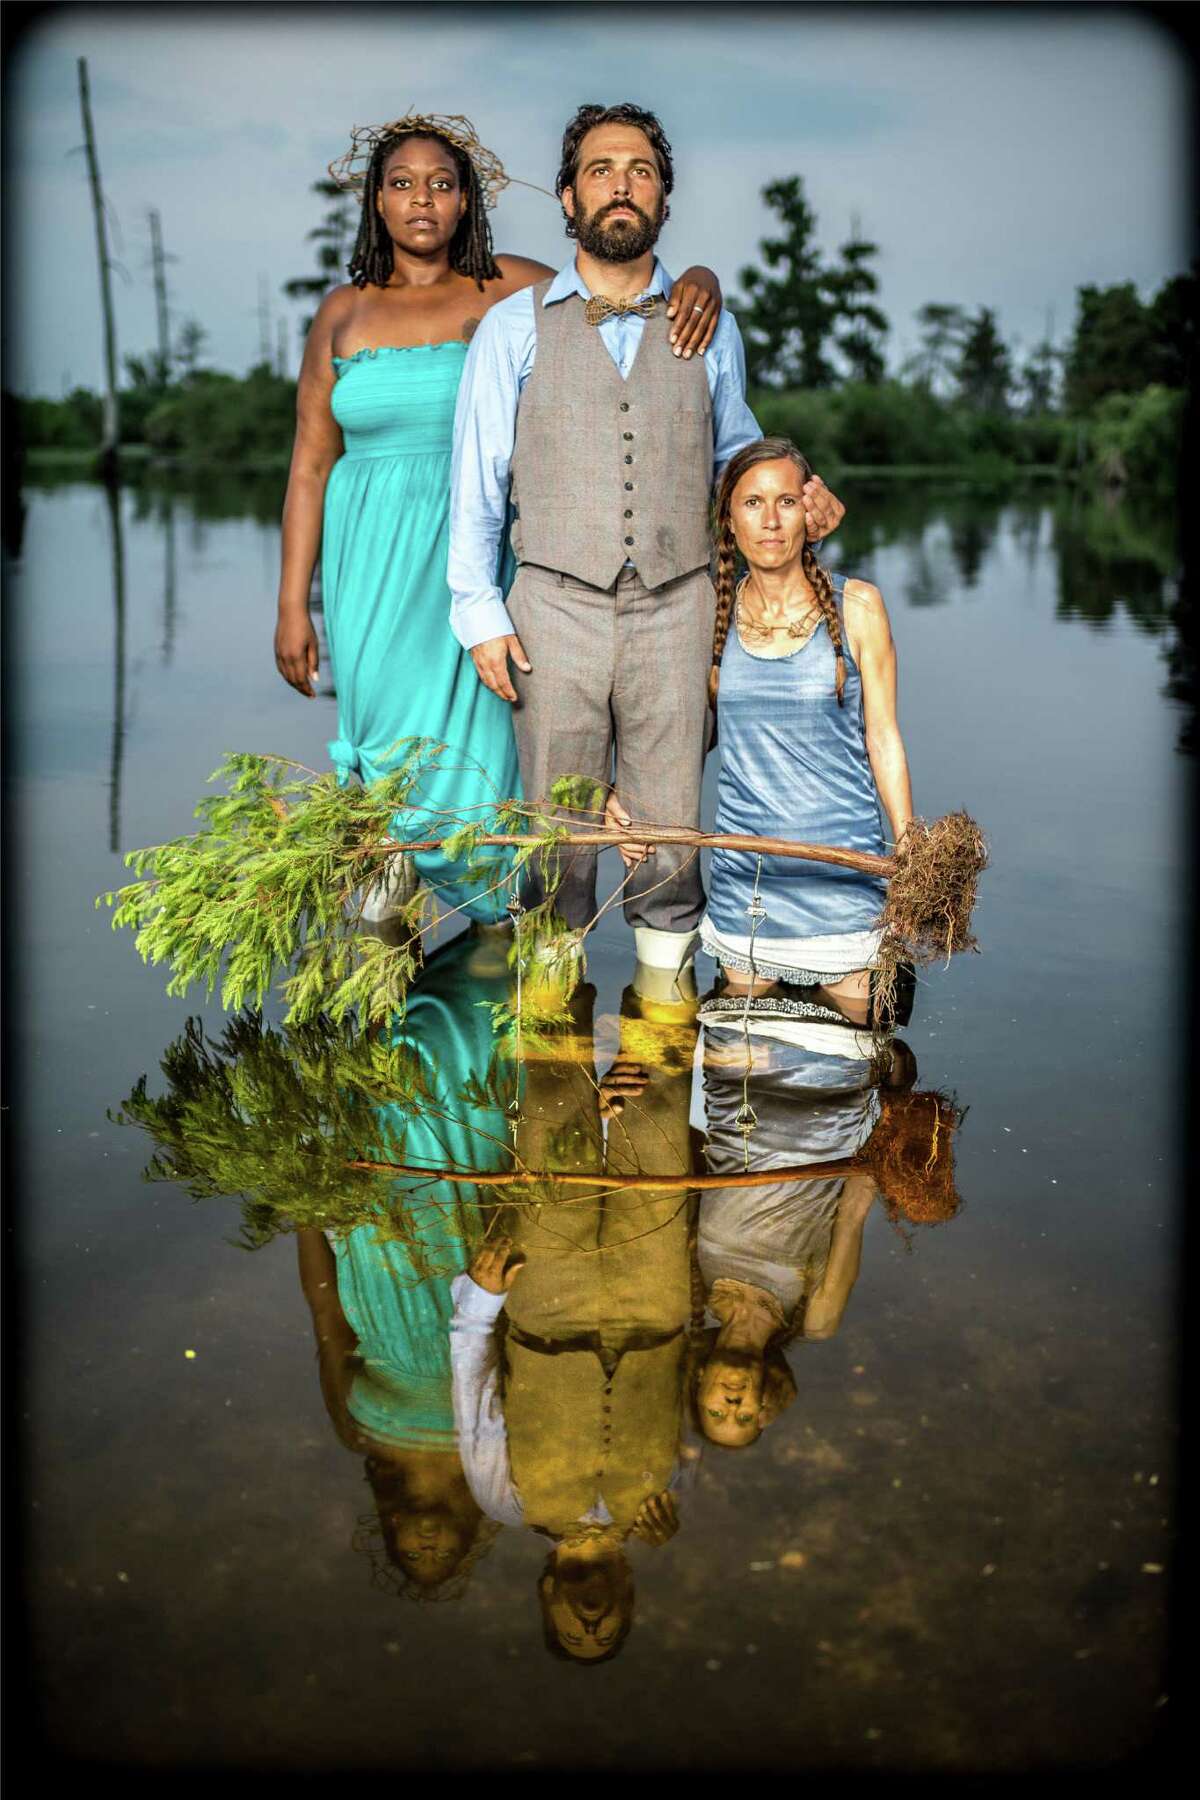 The artists of Cry You One, a collaborative based in Louisiana, will lead workshops and storytelling focused on Gulf Coast restoration at a community salon March 15 at 14 Pews.